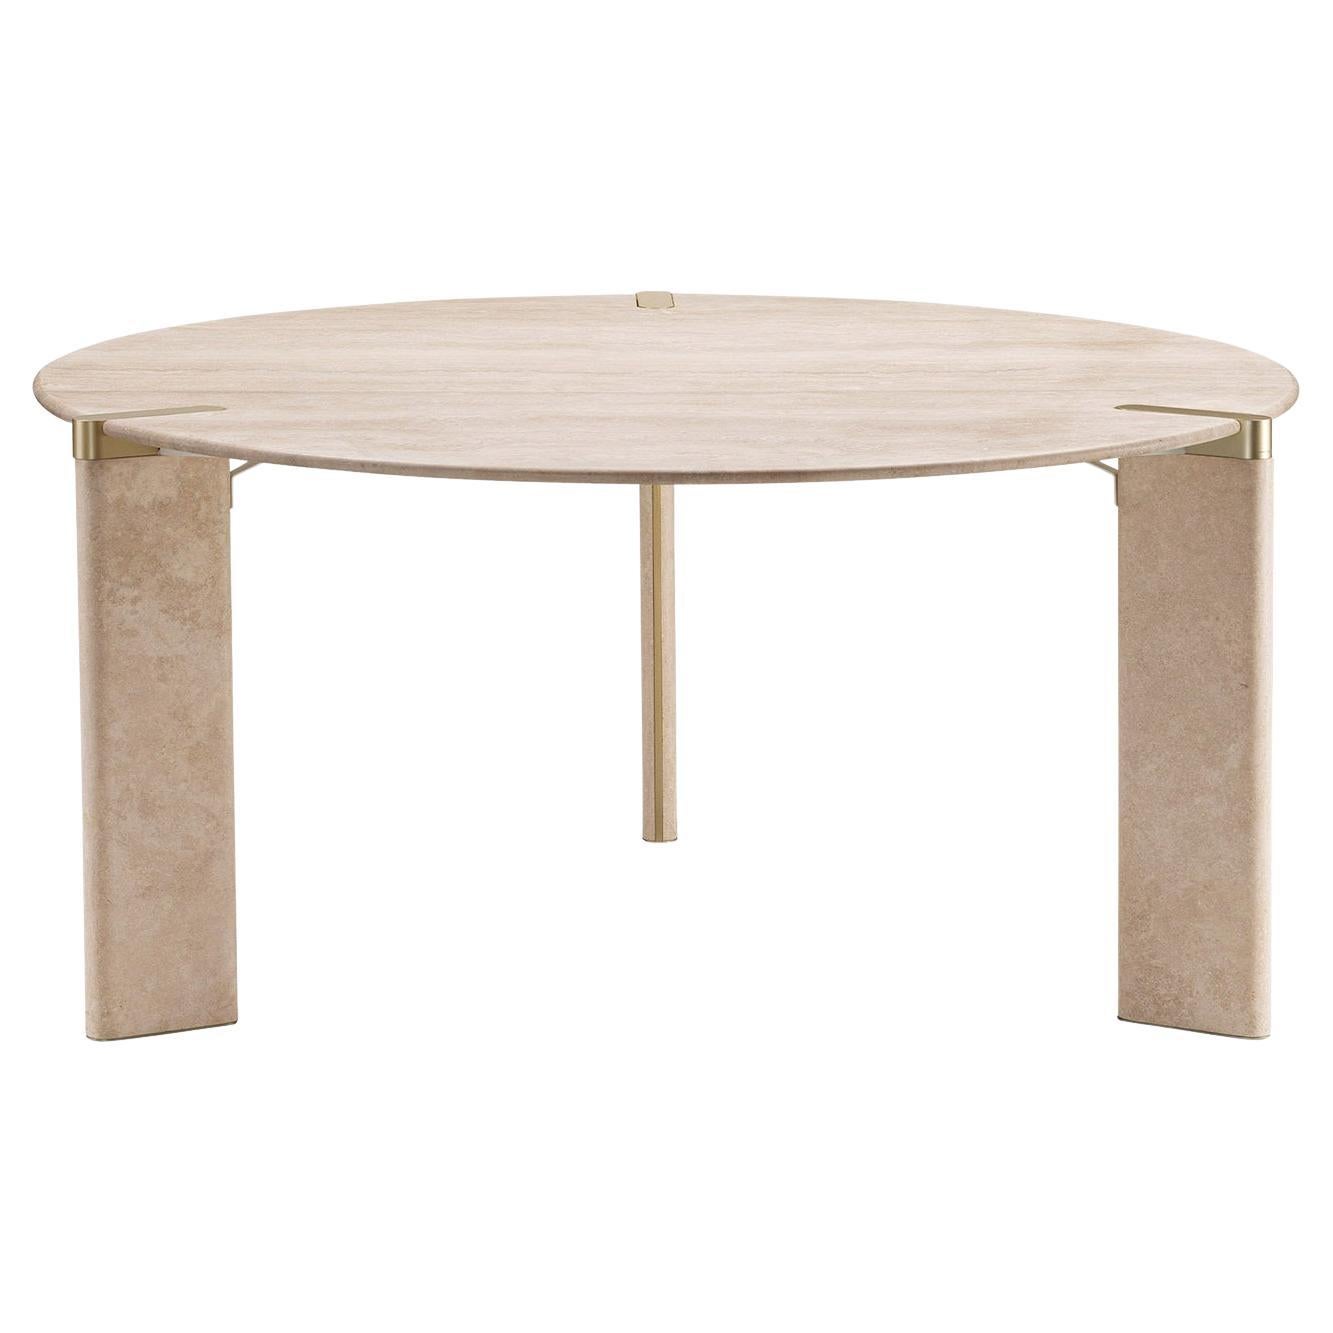 Ottanta Round Travertine Dining Table by Lorenza Bozzoli For Sale